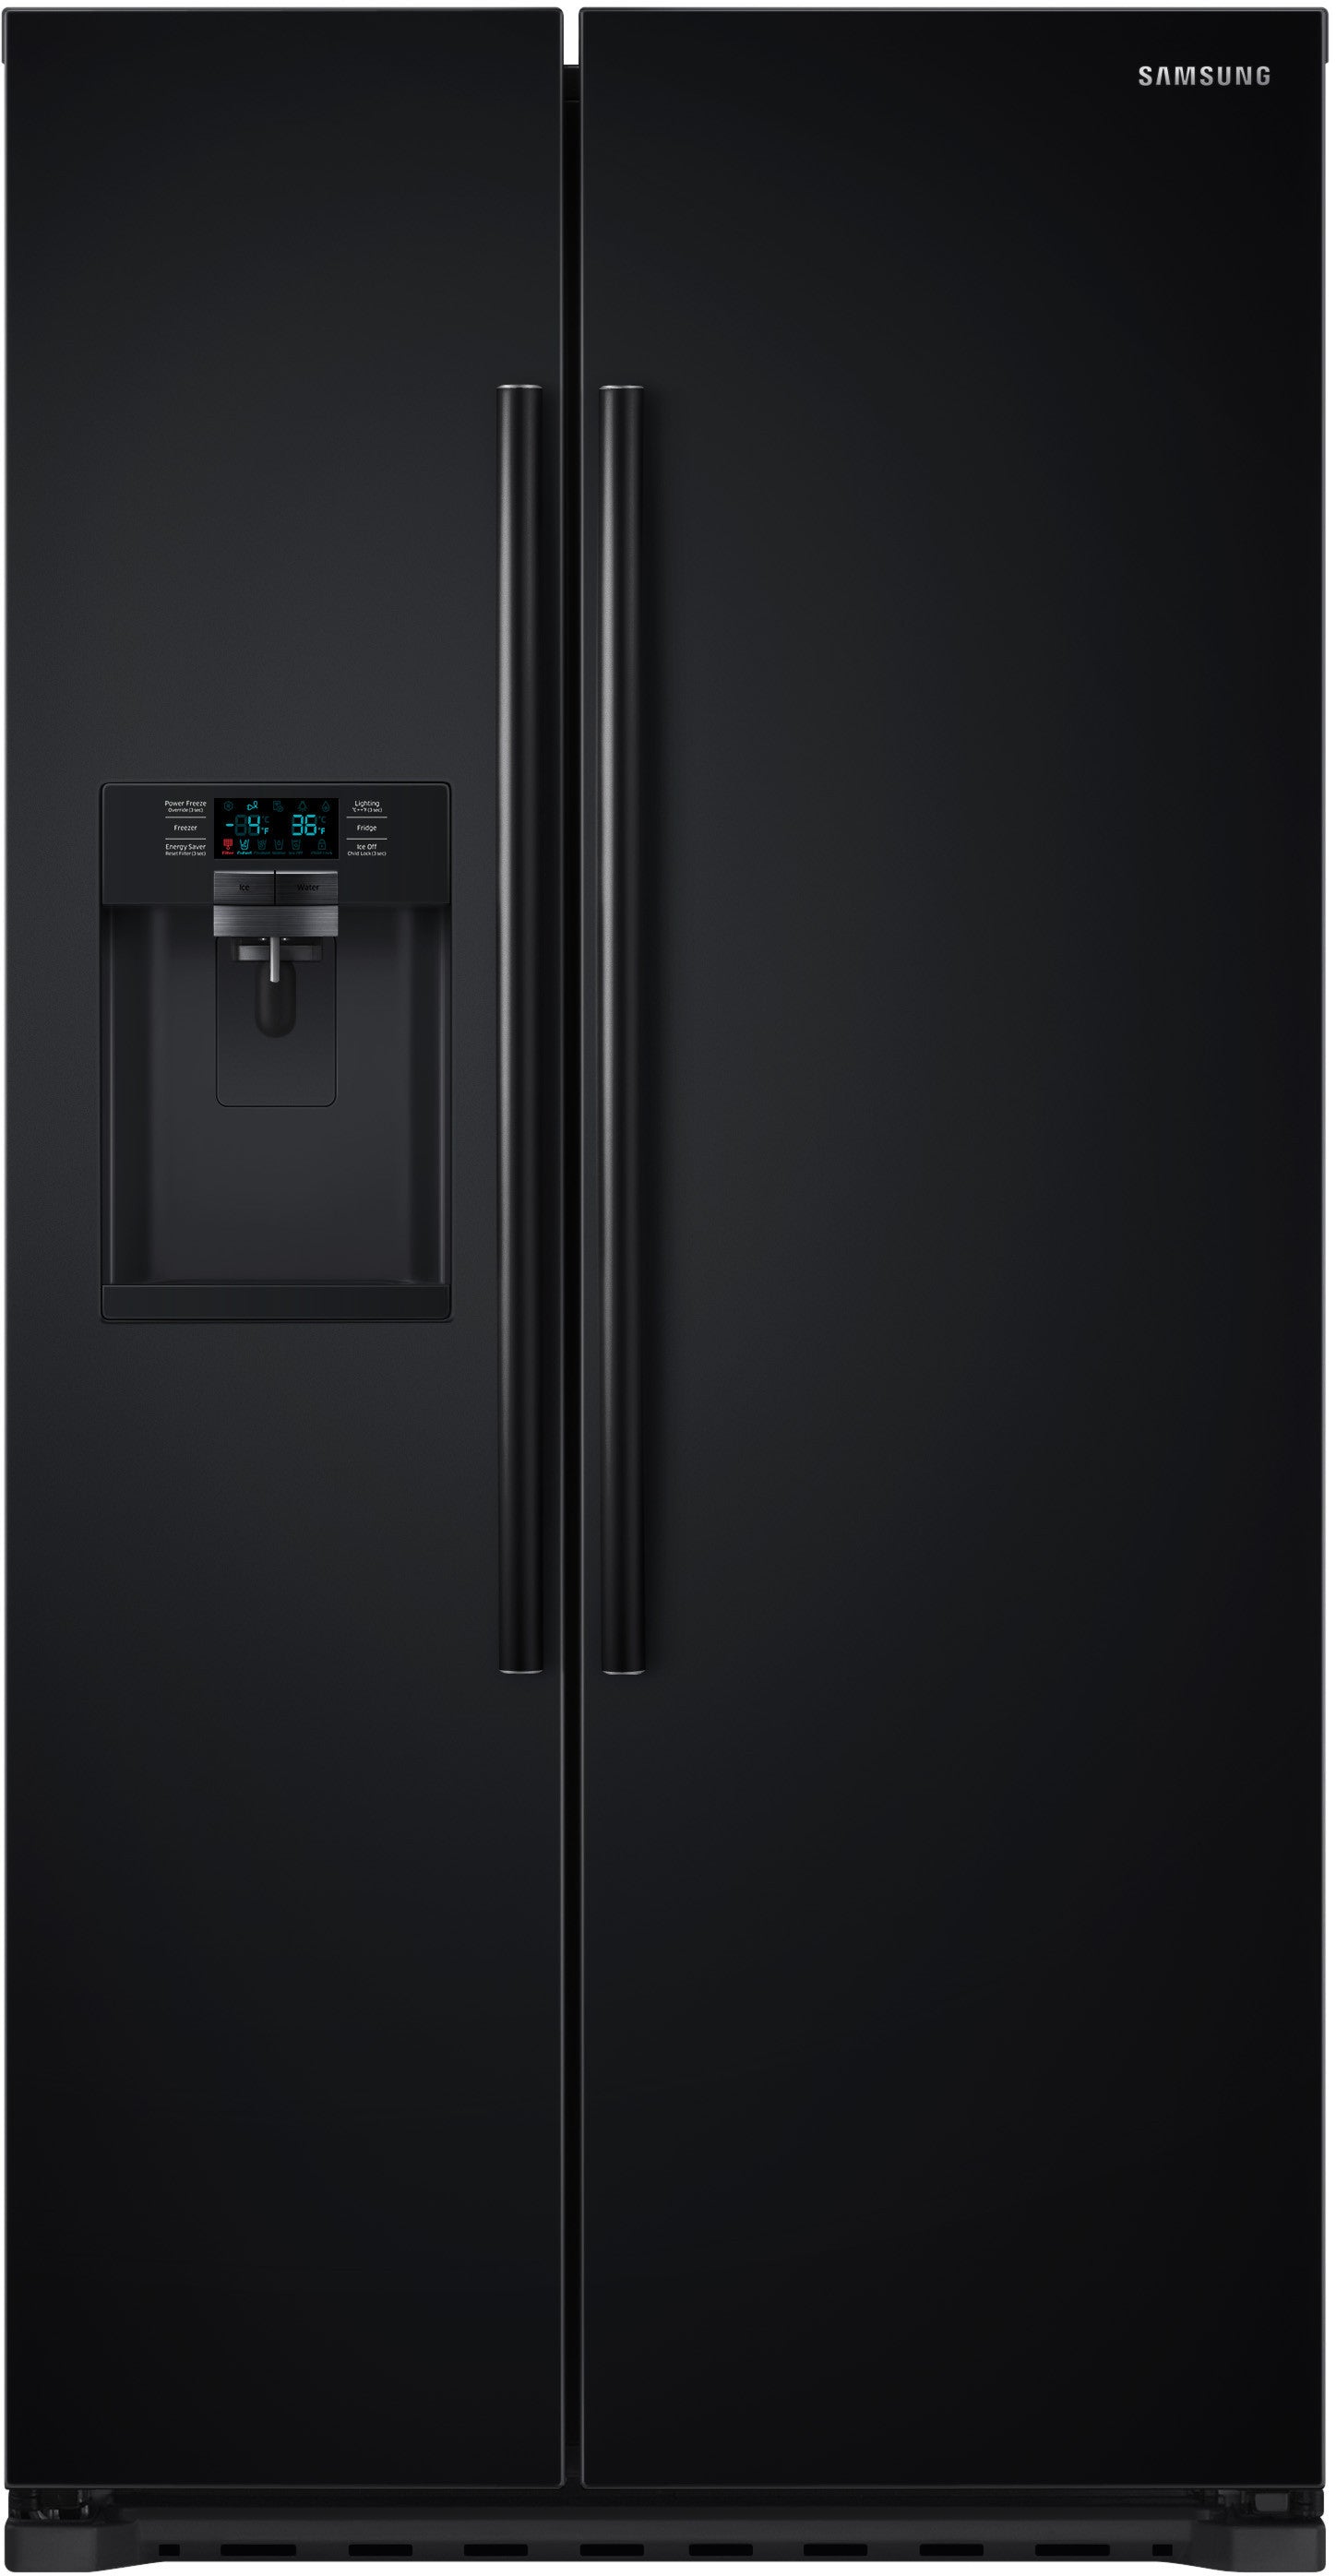 Samsung RS22HDHPNBC/AA 22 Cu. Ft. Counter Depth Side-by-side Refrigerator